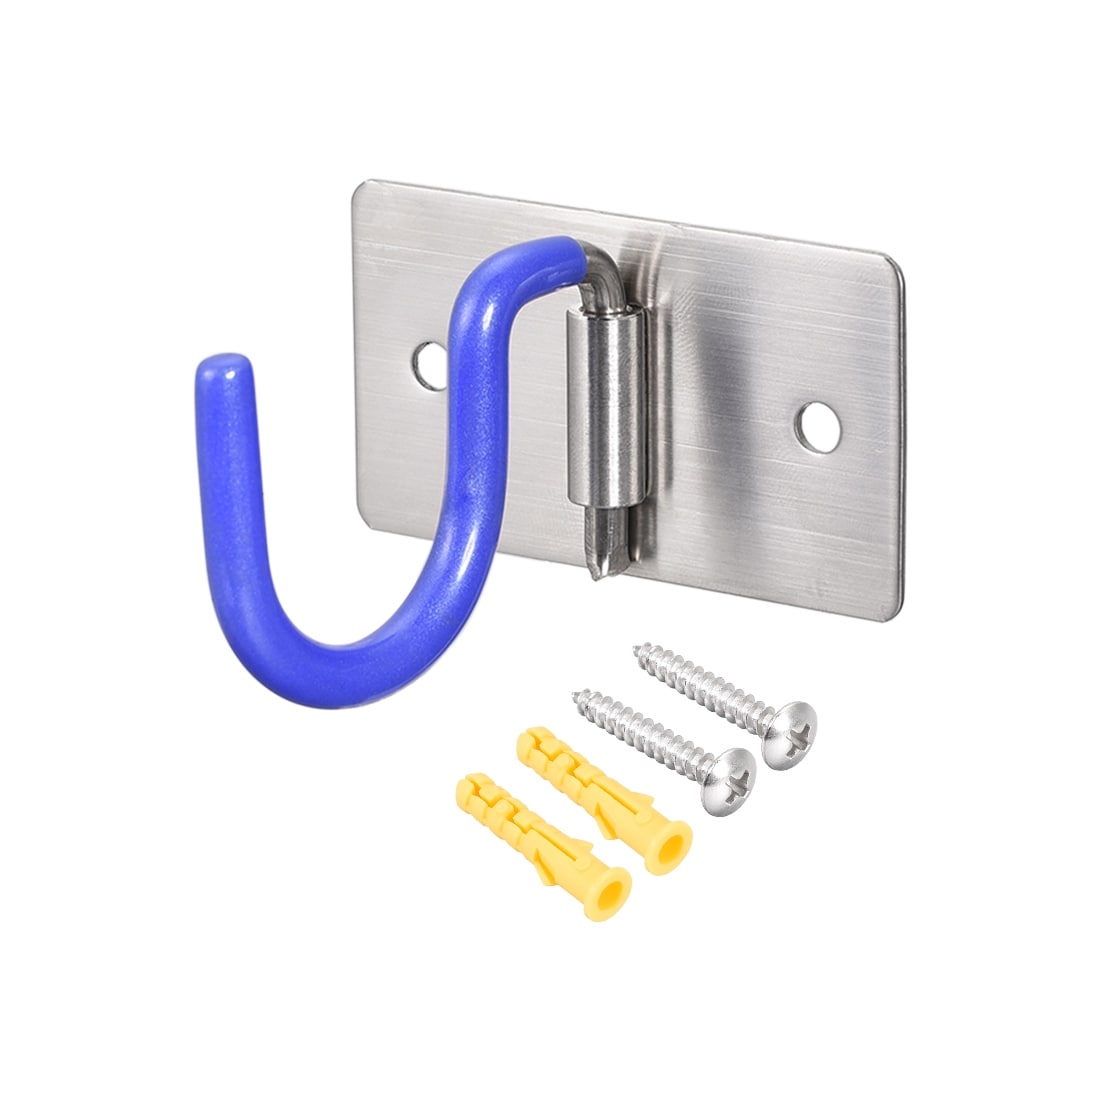 https://ak1.ostkcdn.com/images/products/is/images/direct/10bfd413a5356876855e365f1fb0f2f7552aac92/Wall-Hooks-Mop-Broom-Holder-Organizer-Stainless-Steel-Hook-S-type-Blue.jpg